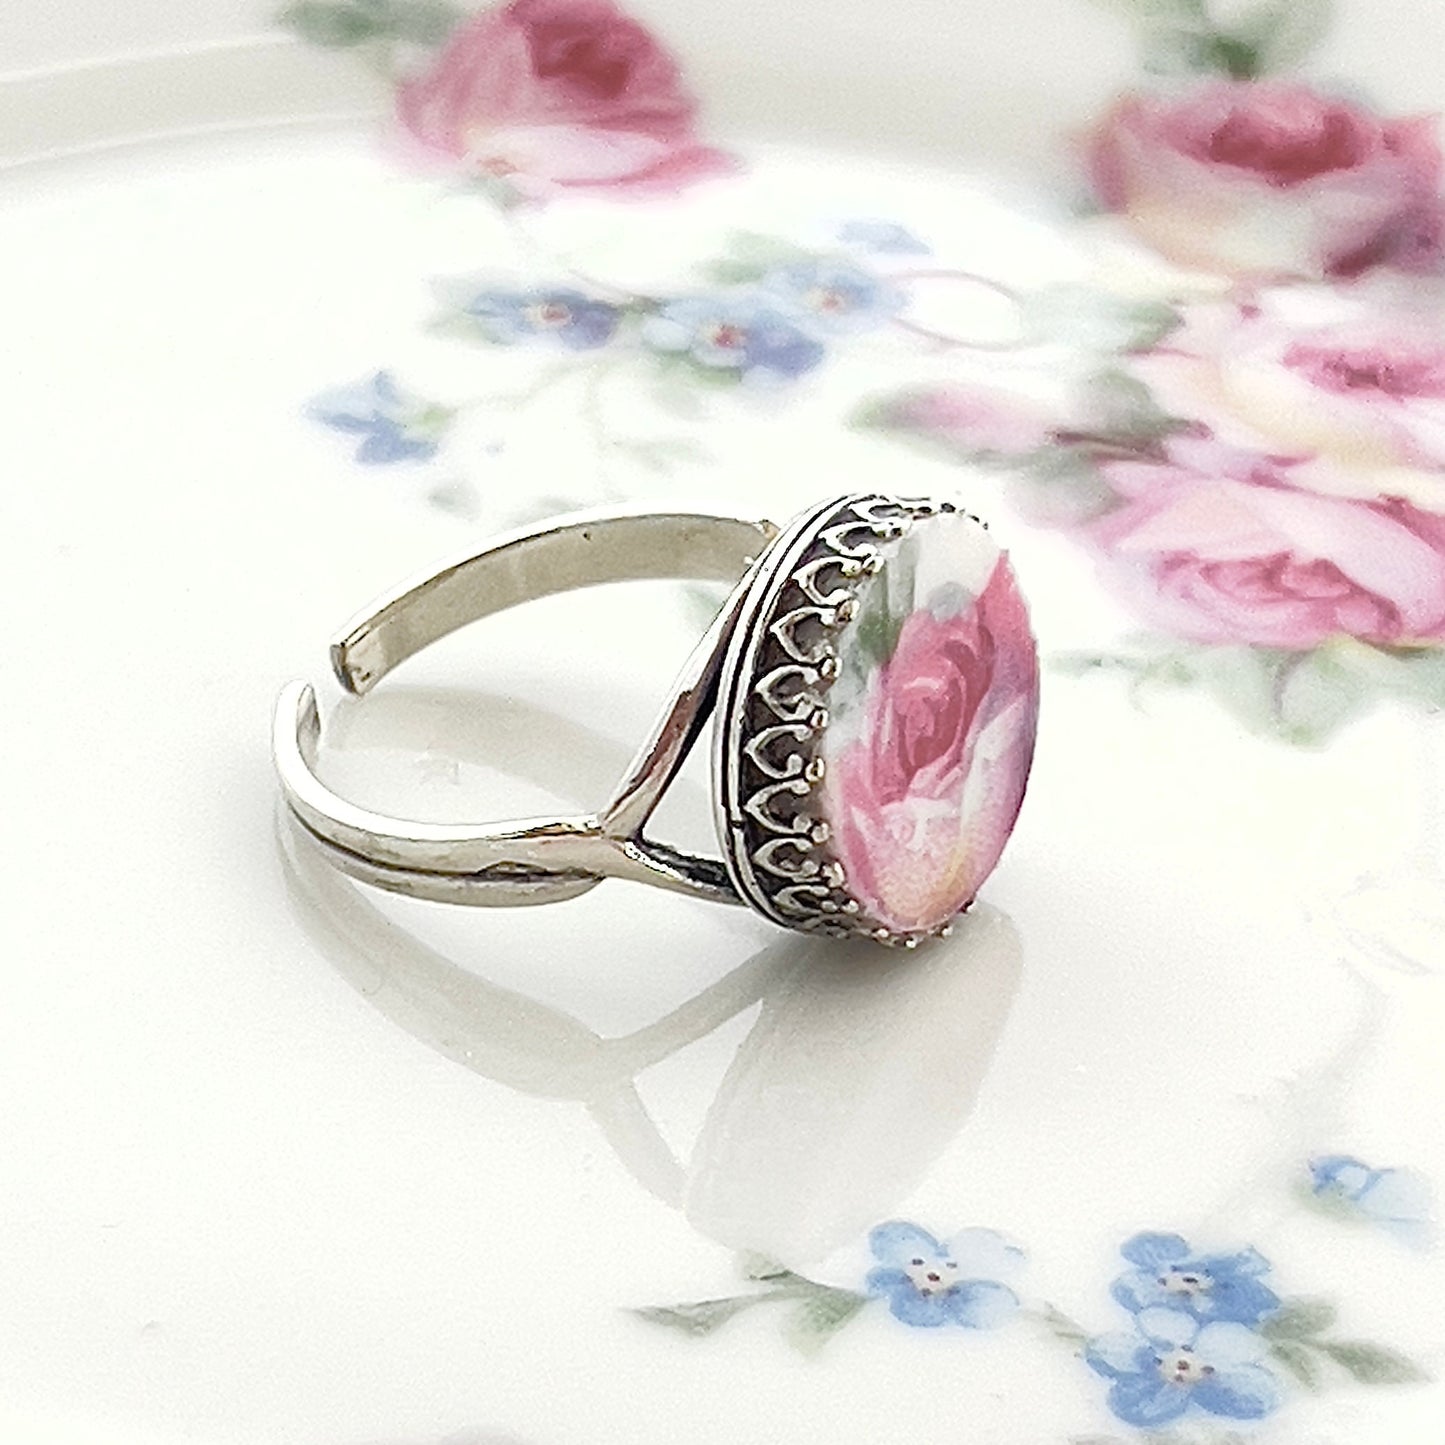 Cottage Core Jewelry, Vintage China Broken China Jewelry Ring, Victorian Pink Rose